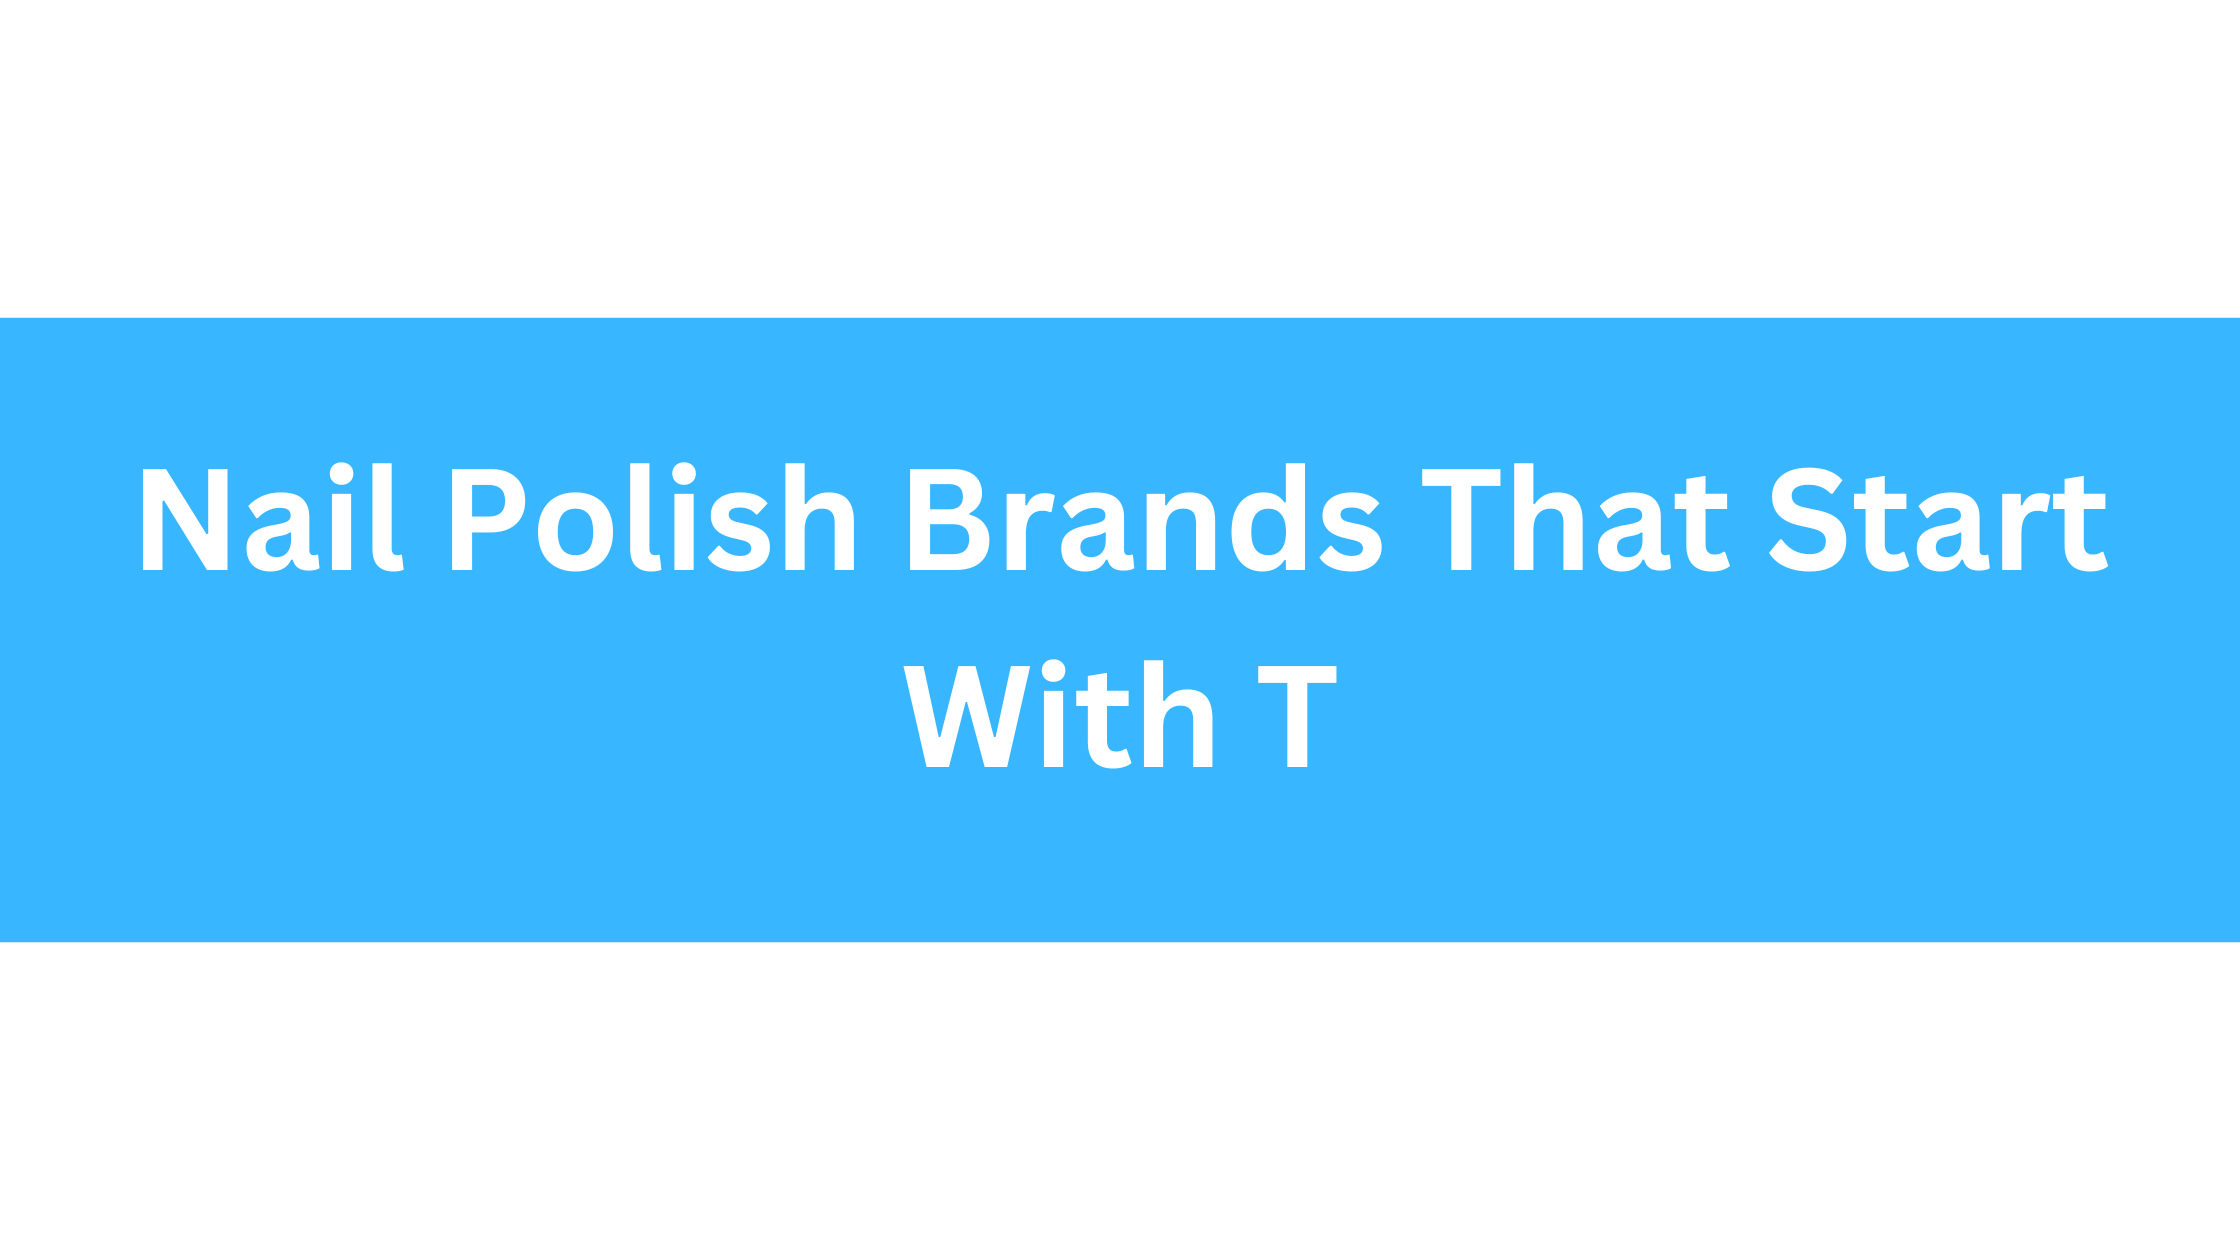 Nail Polish Brands That Start With T